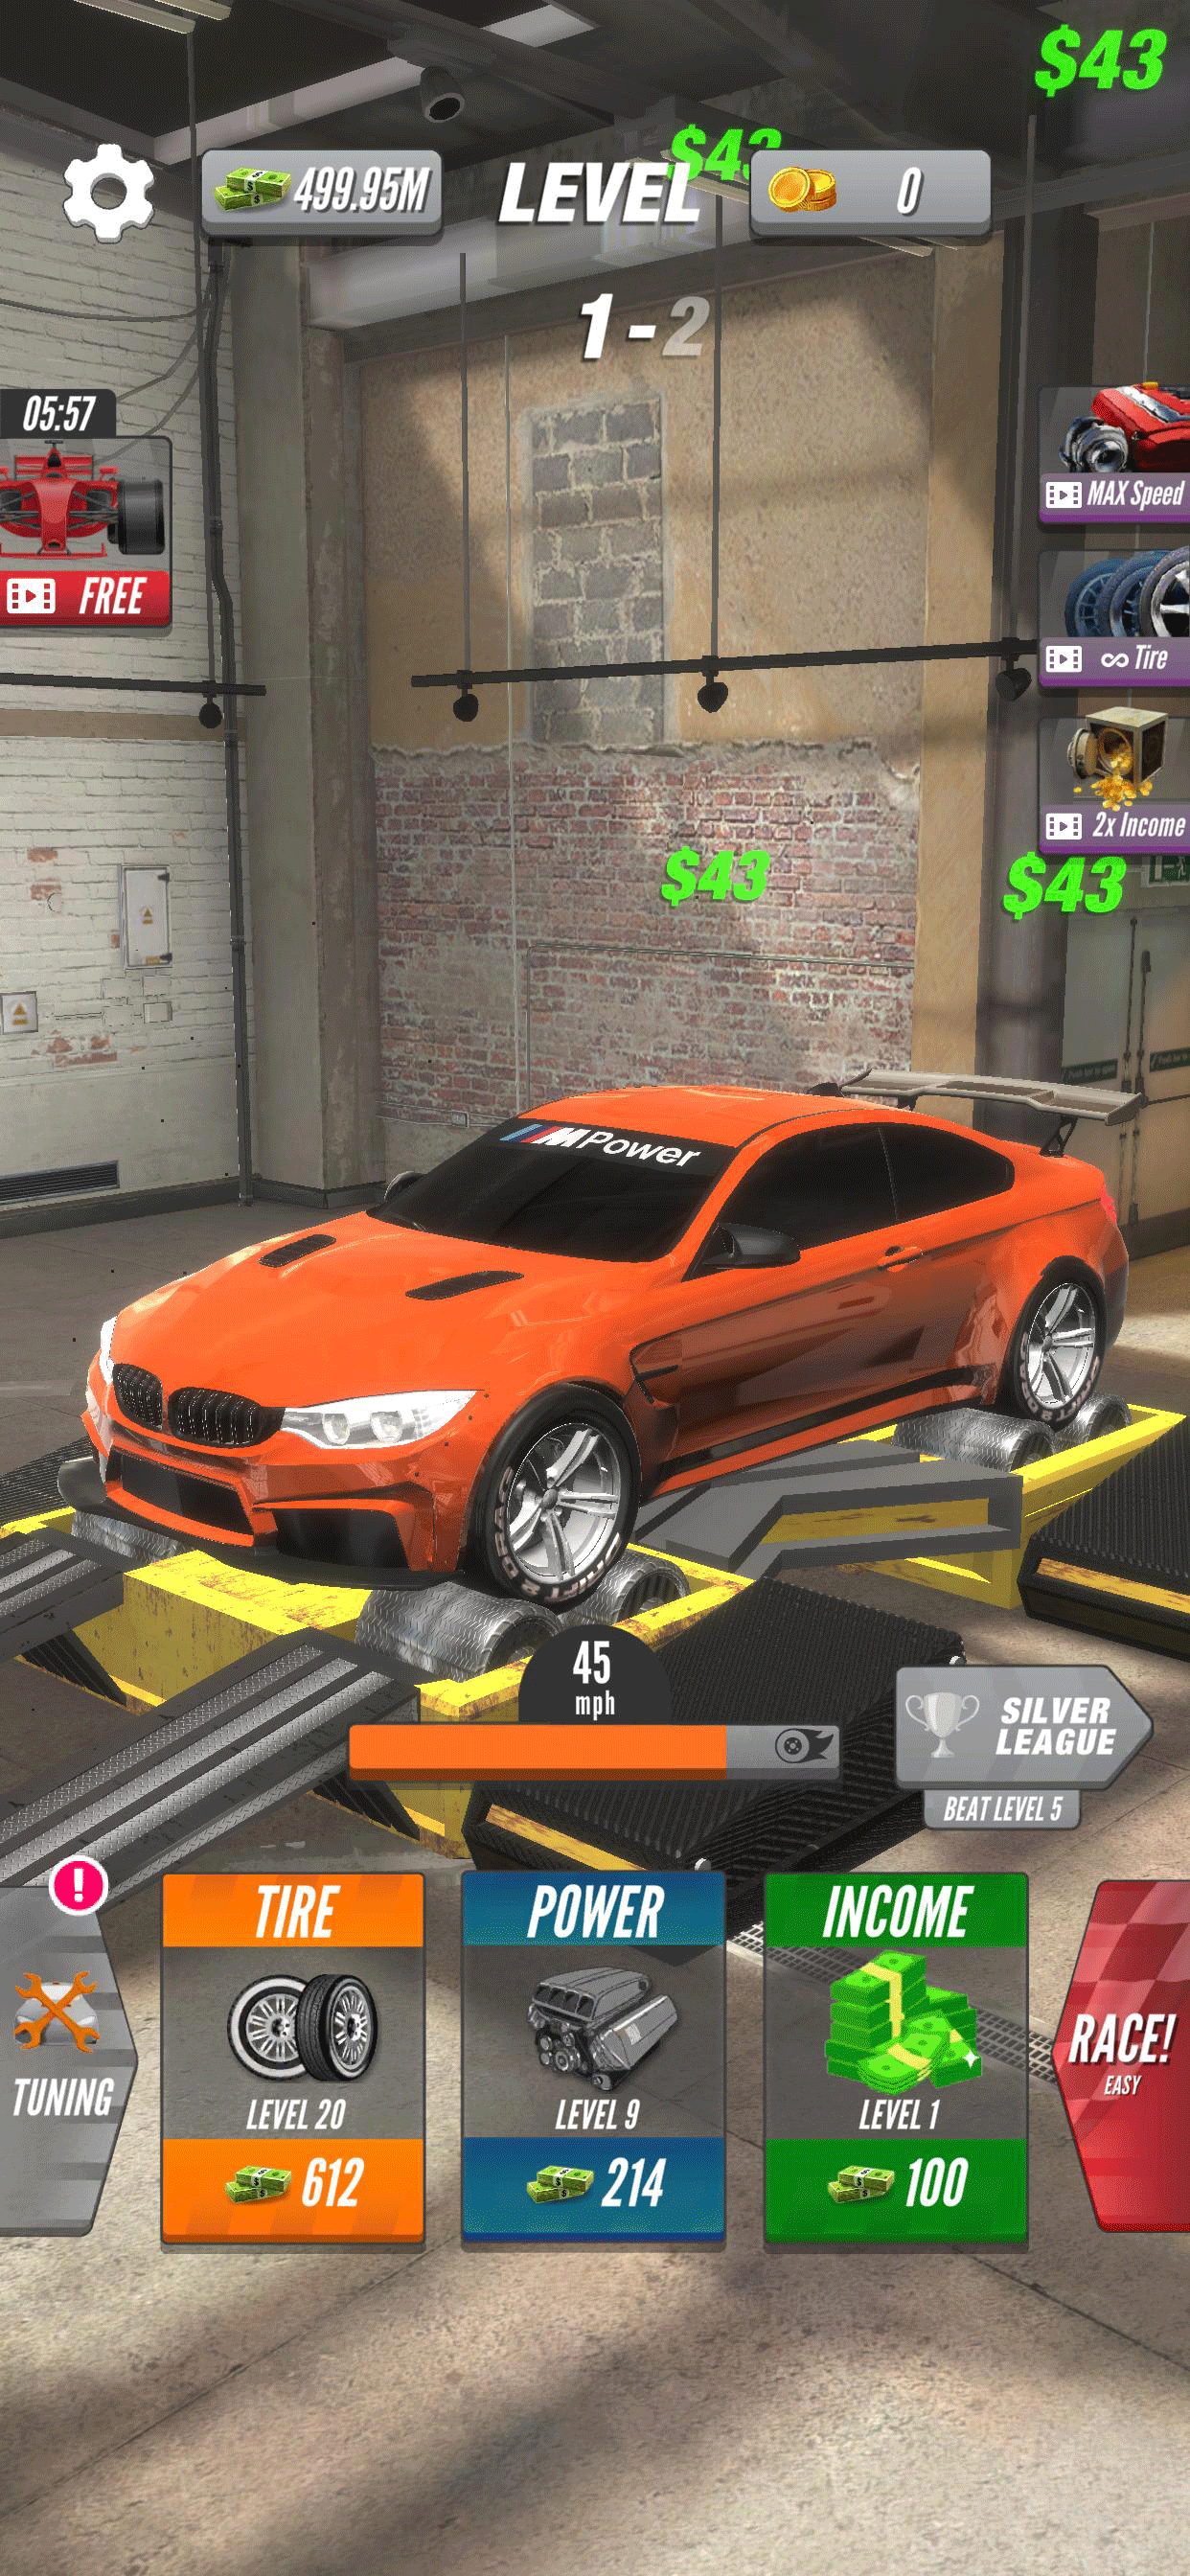 Play Drift Max Pro Car Racing Game Online for Free on PC & Mobile